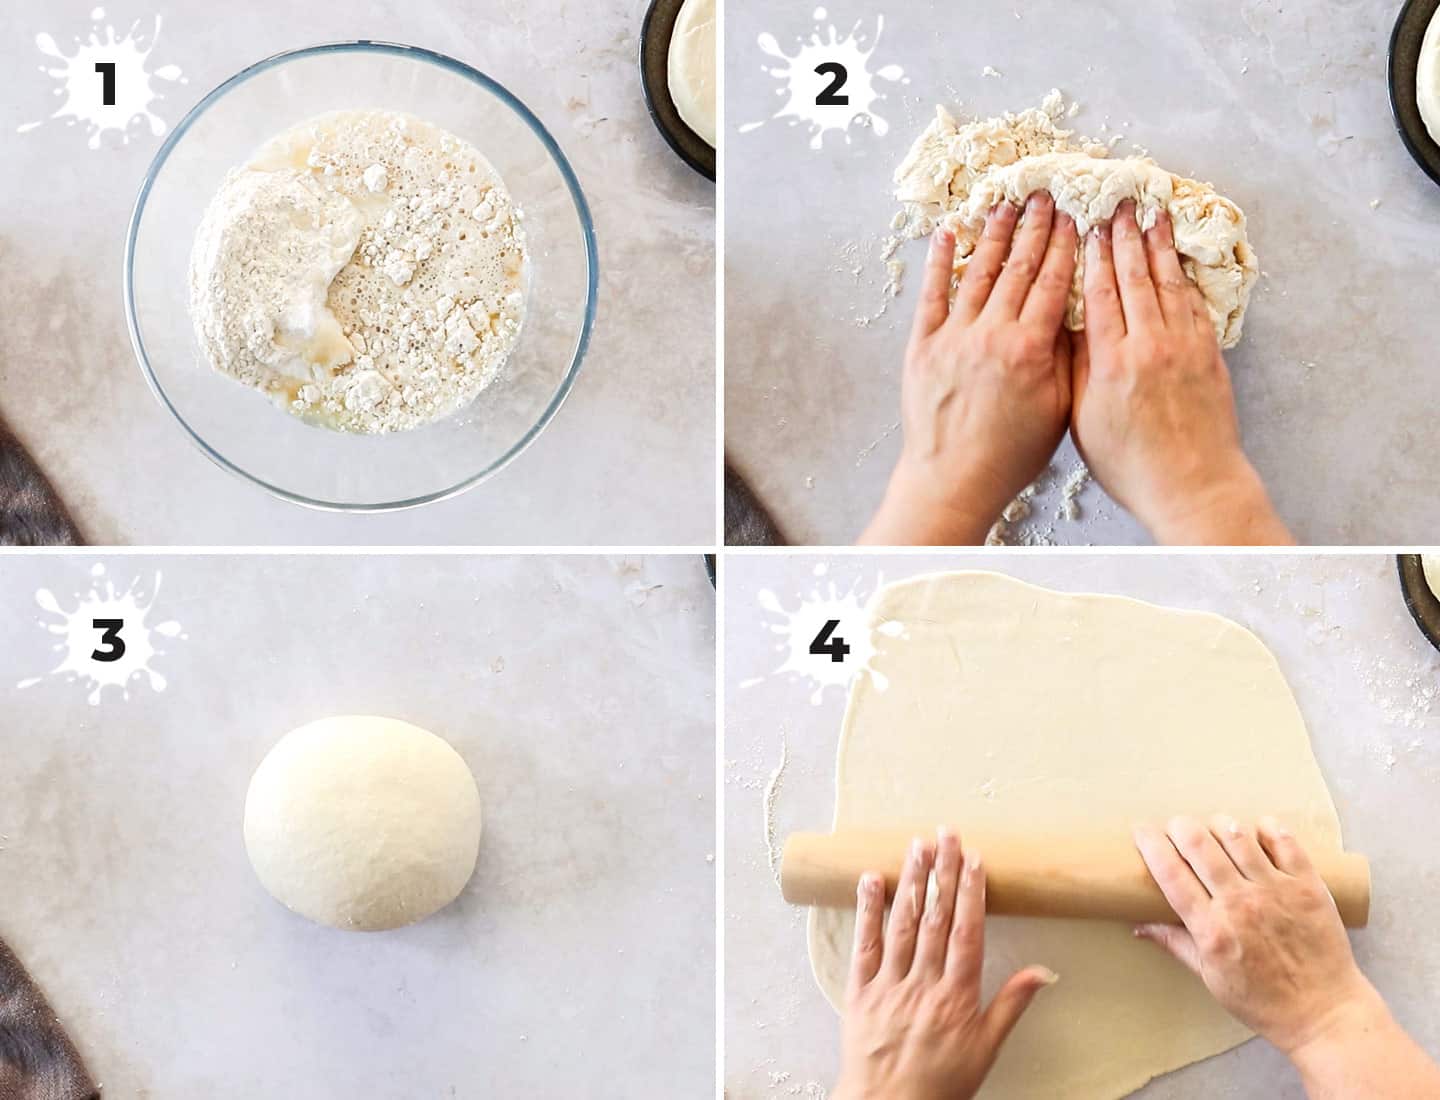 A collage of 4 images showing how to prepare the dough for cheese focaccia.